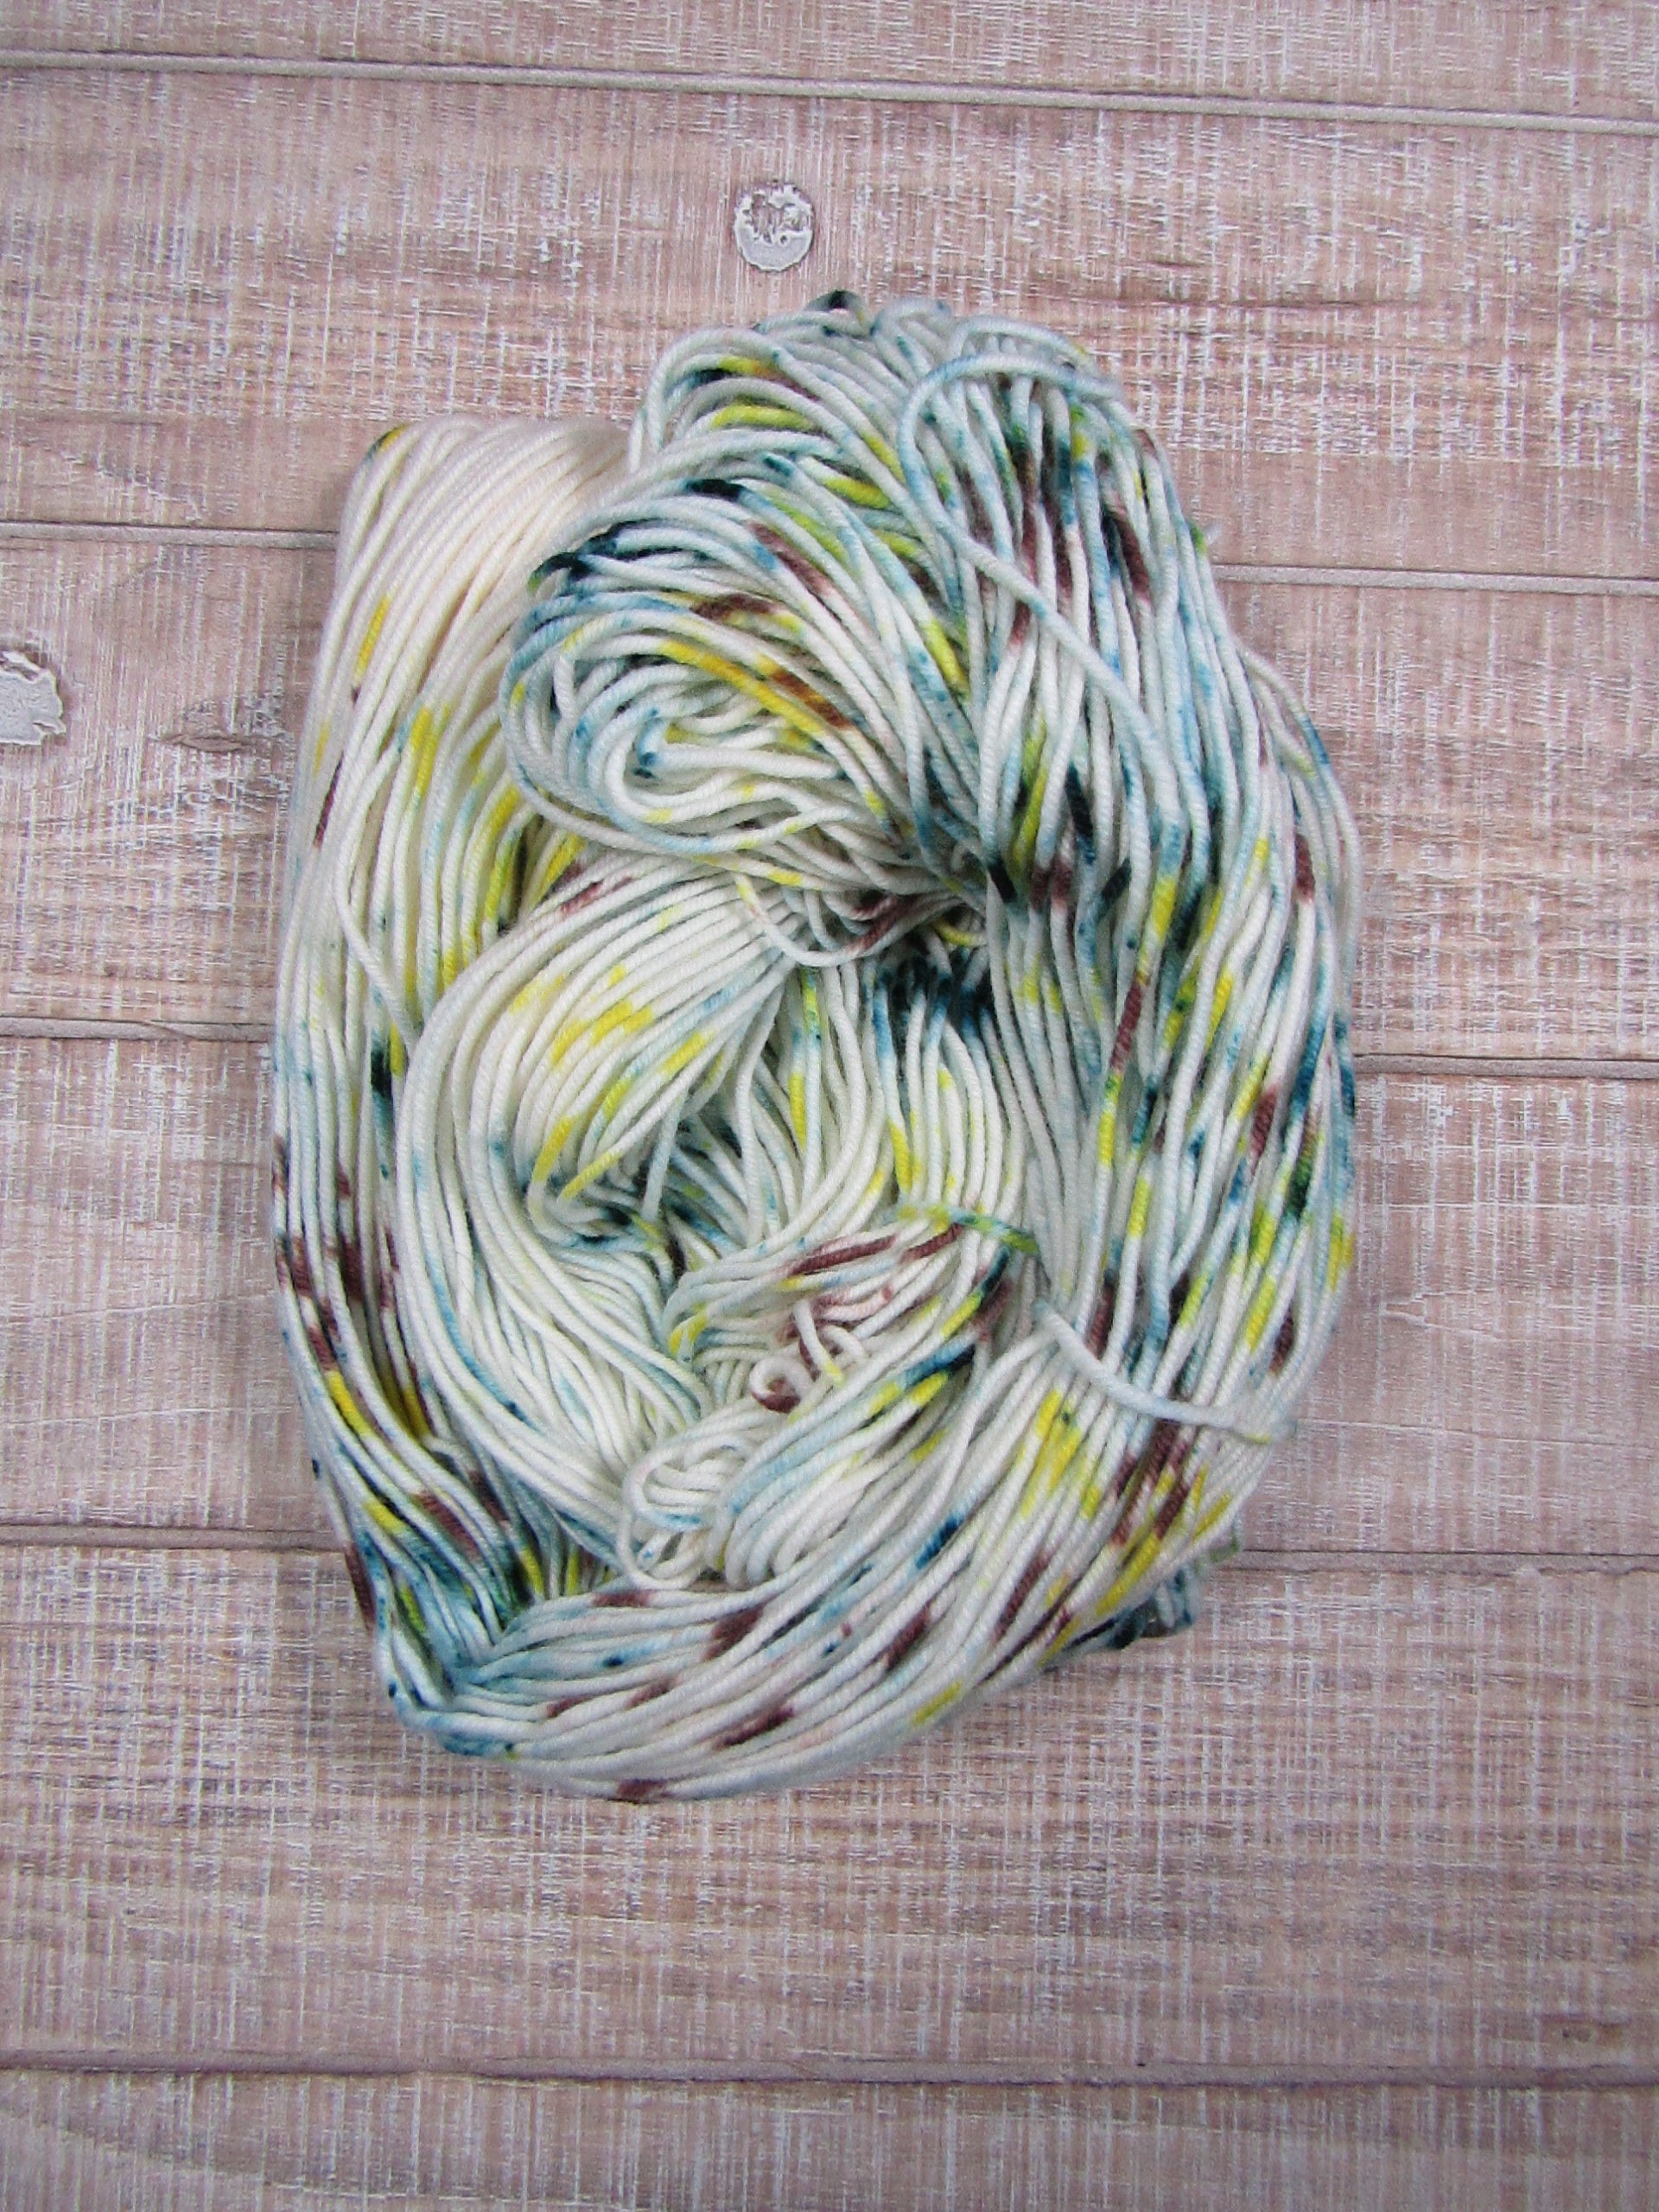 Hand-dyed yarn - Miles Merino/Cashstyle nylon worsted weight yarn with blue/green, yellow, and brown speckles.